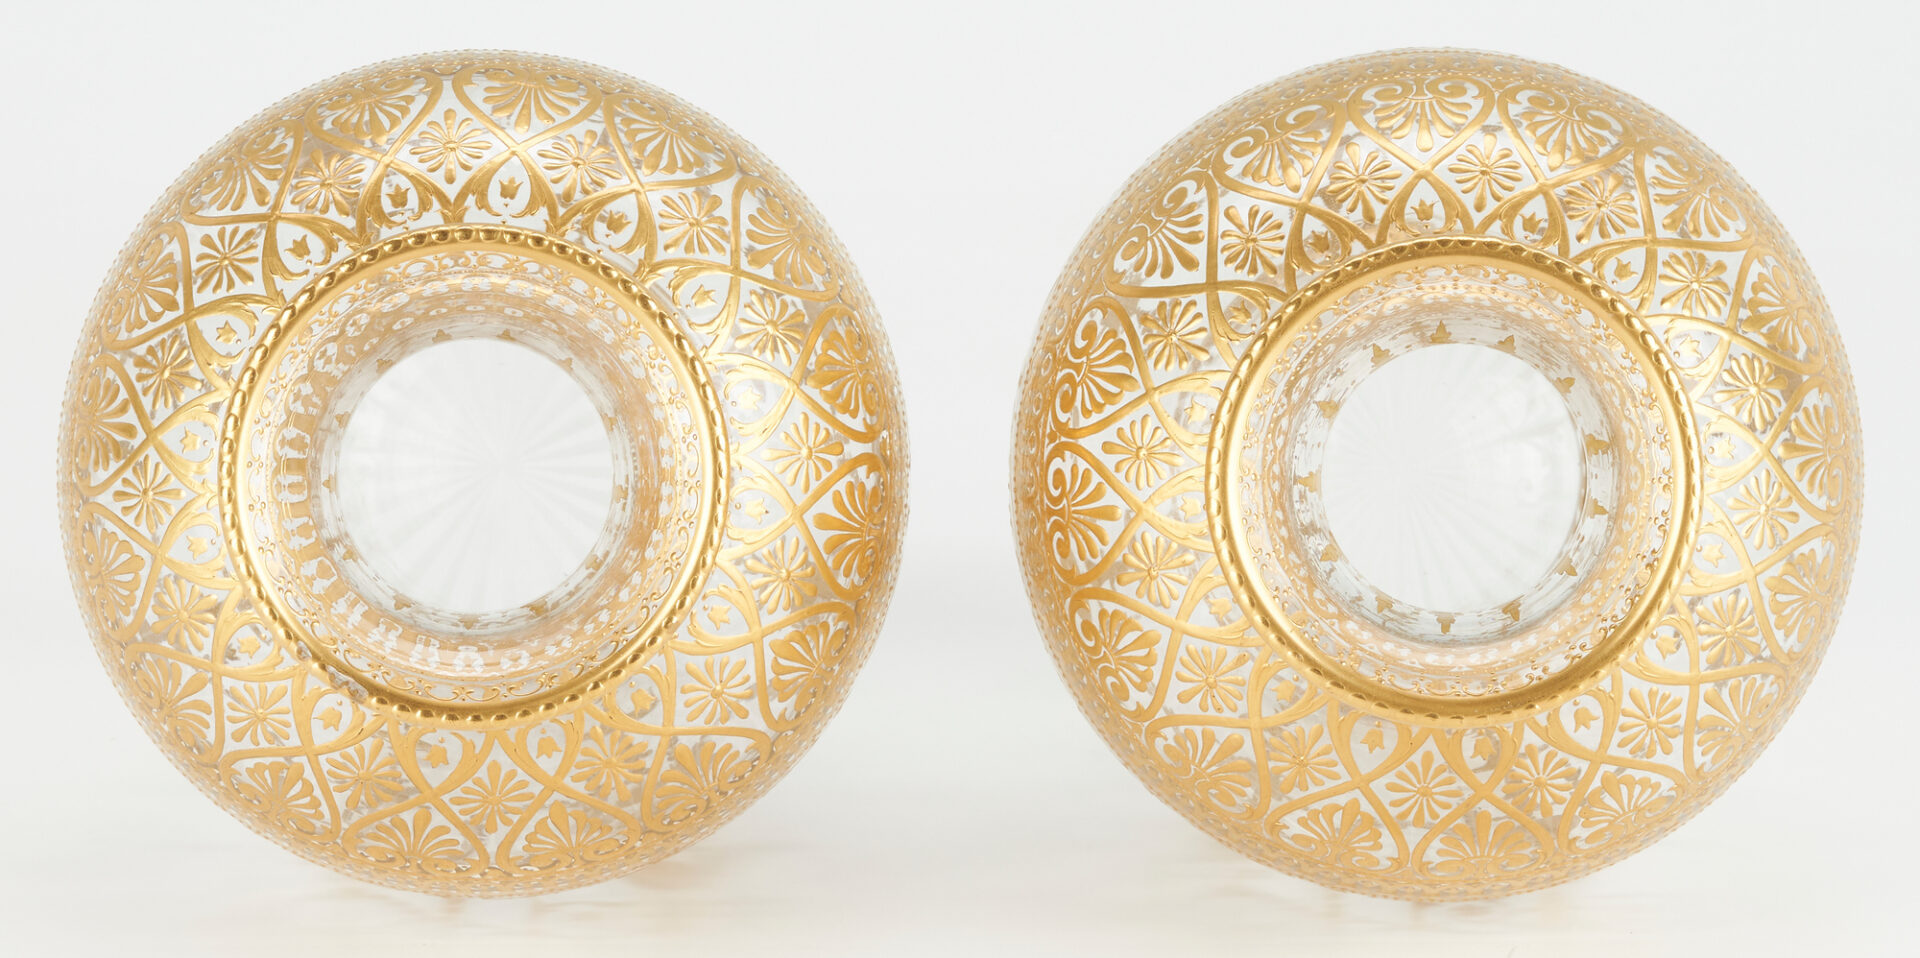 Lot 313: Pair of Baccarat Vases w/ Neoclassical Gilt Decoration